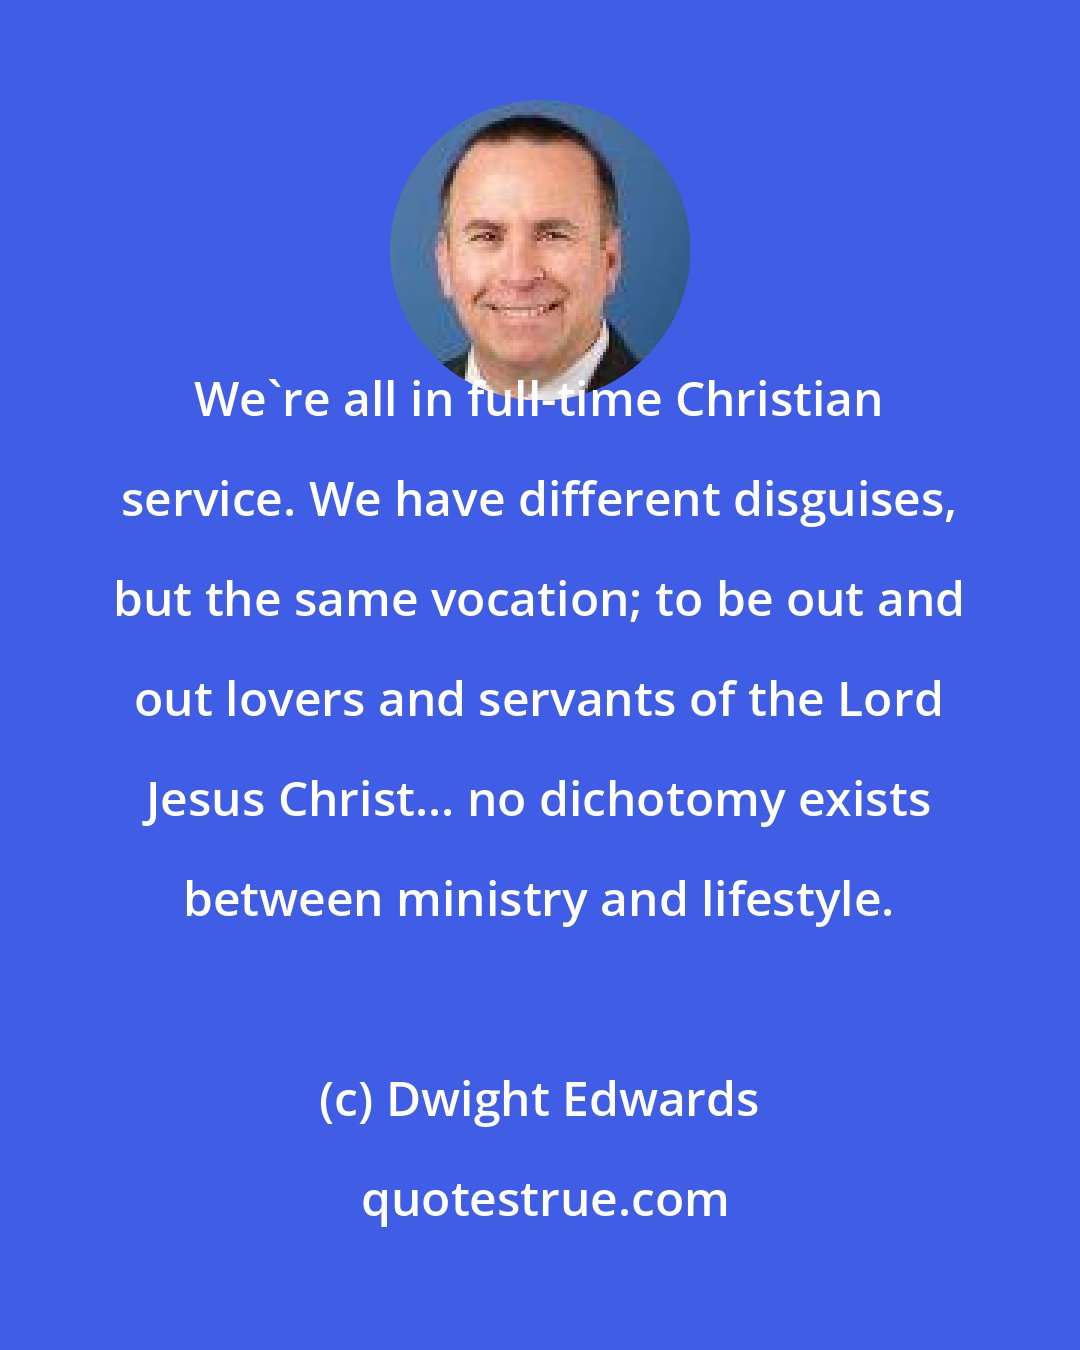 Dwight Edwards: We're all in full-time Christian service. We have different disguises, but the same vocation; to be out and out lovers and servants of the Lord Jesus Christ... no dichotomy exists between ministry and lifestyle.